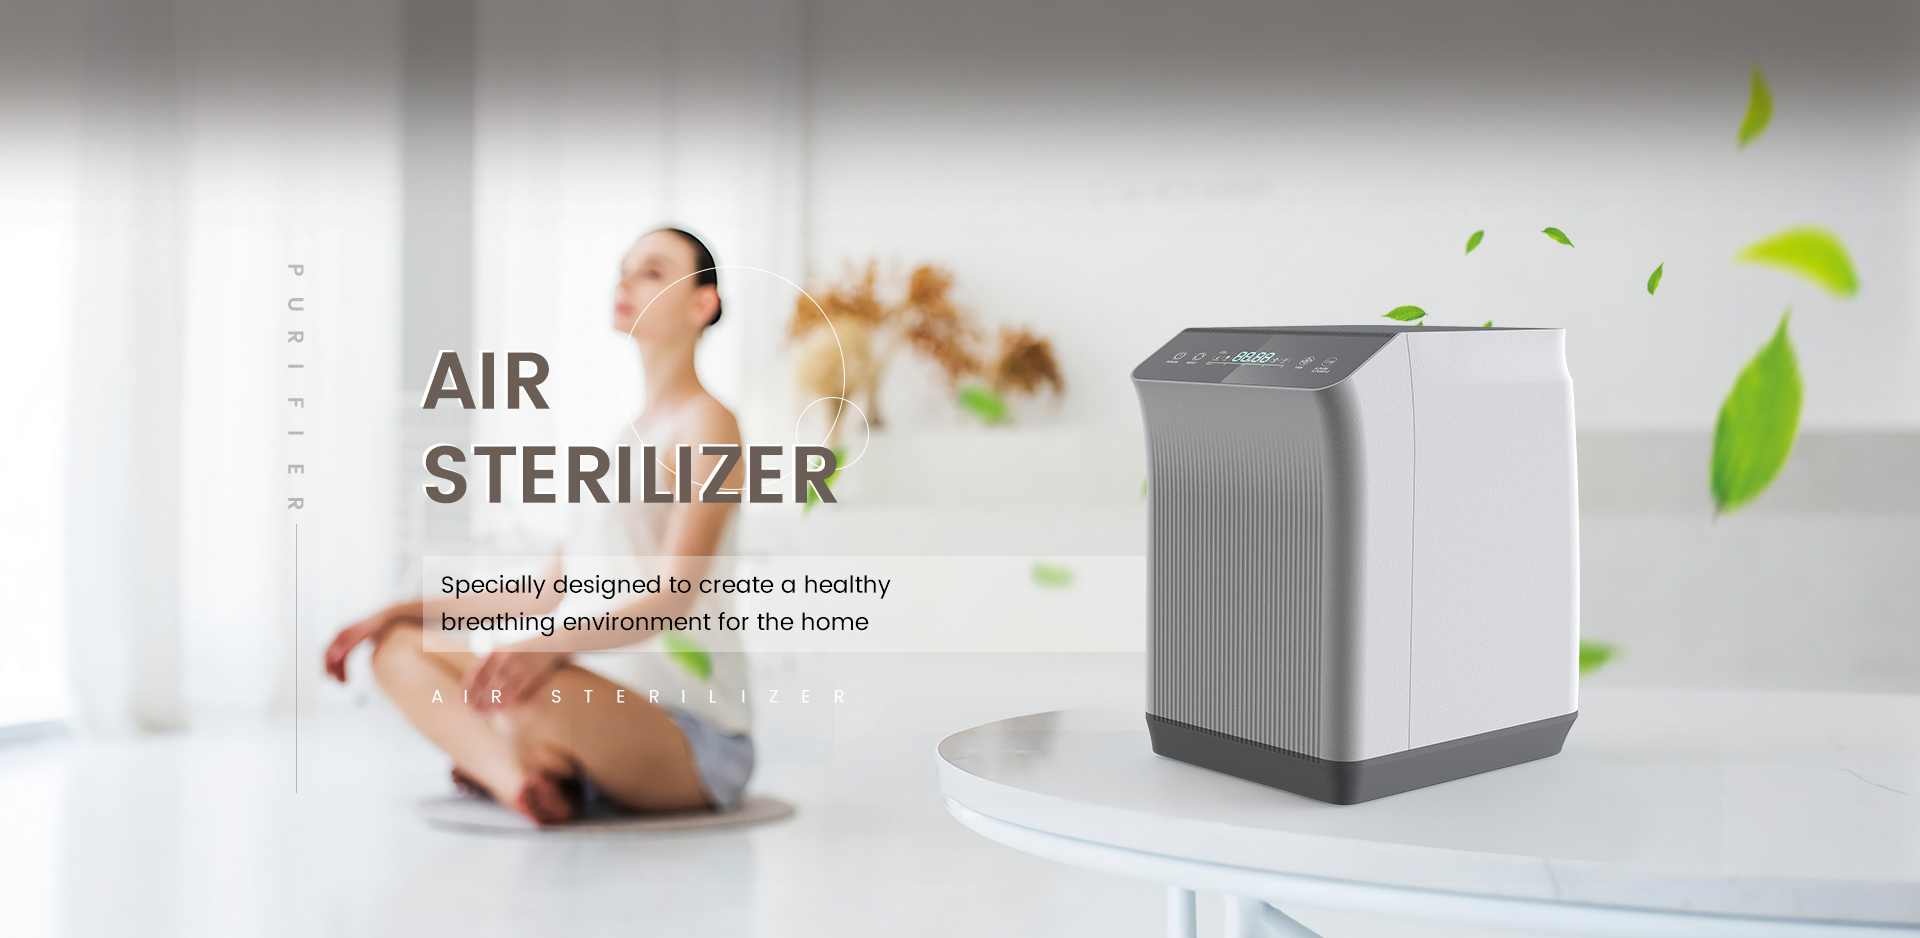 https://www.leeyoroto.com/f-air-purifier-specially-designed-to-create-a-healthy-breathing-environment-for-the-home-product/